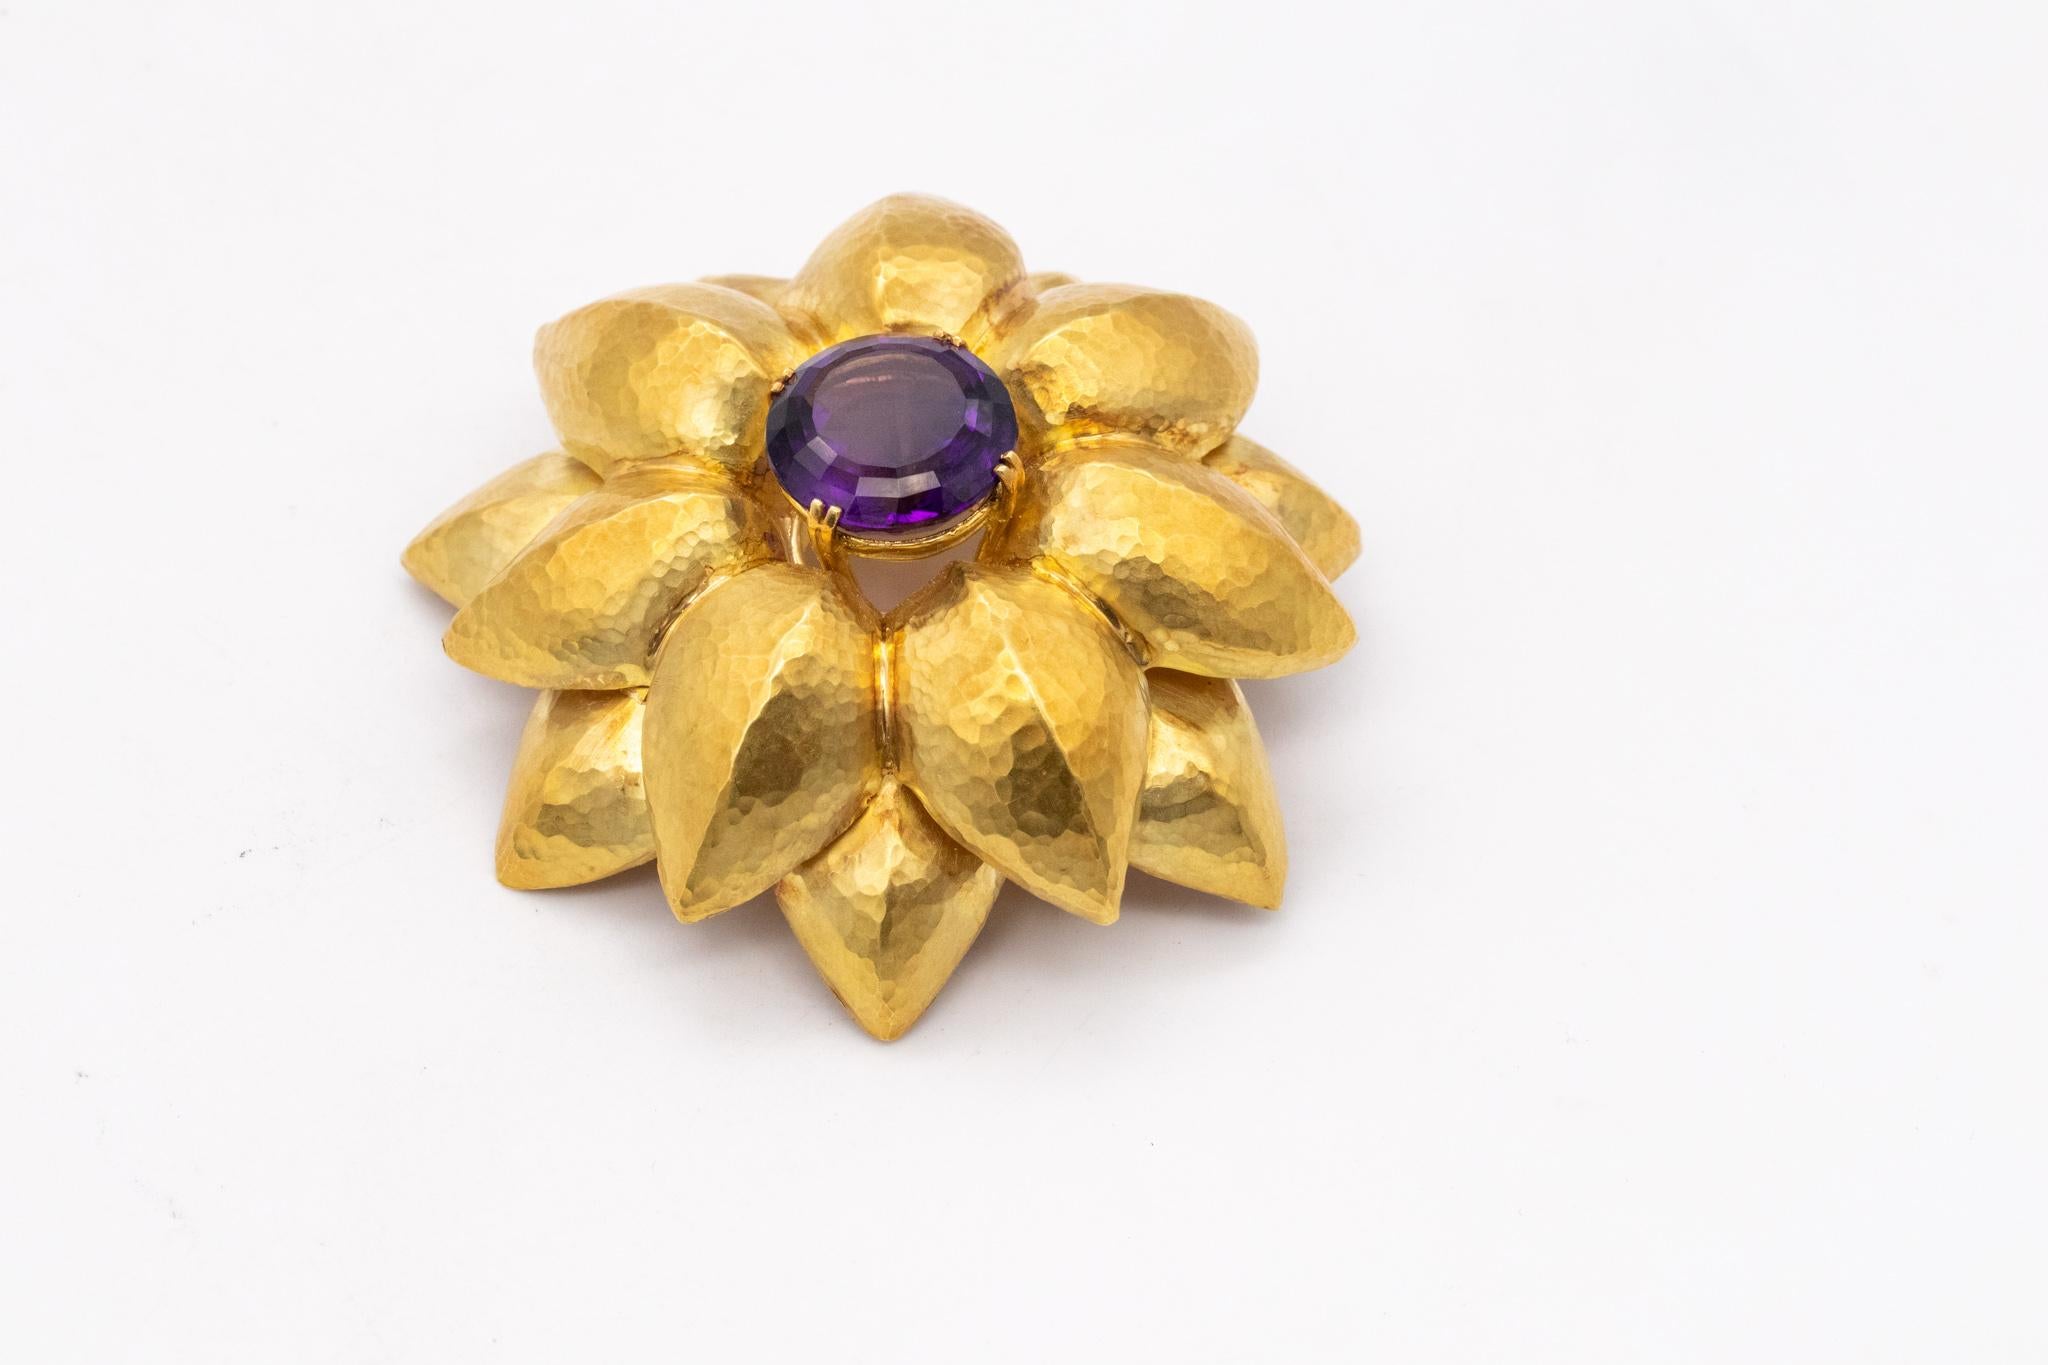 Women's Tiffany & Co 1989 By Paloma Picasso Pendant-Brooch In 18Kt Gold With Amethyst For Sale